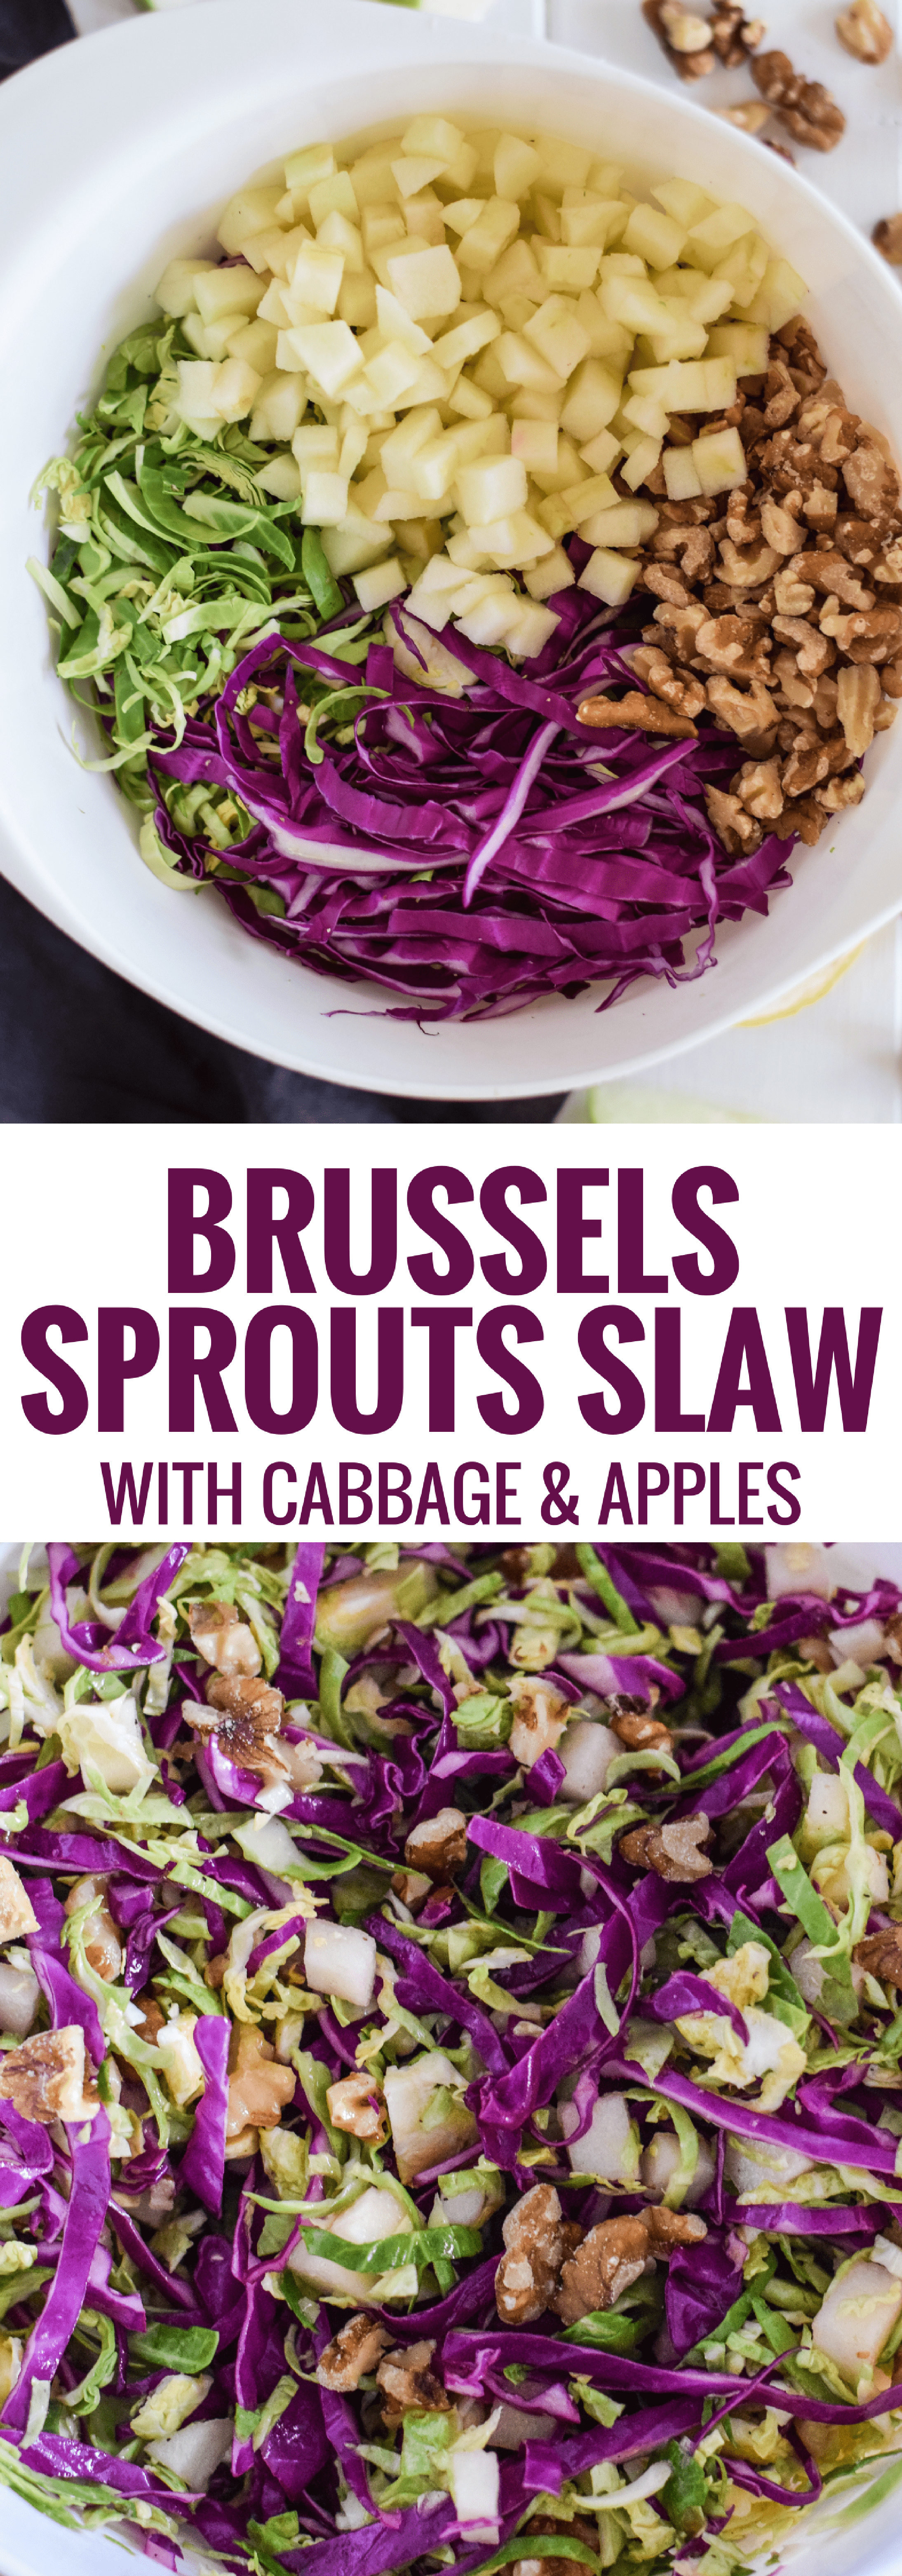 This healthy Brussels Sprouts Slaw with Cabbage and Apples is the perfect side dish for any meal. Also goes great on tacos! (gluten free, paleo, vegetarian, vegan)